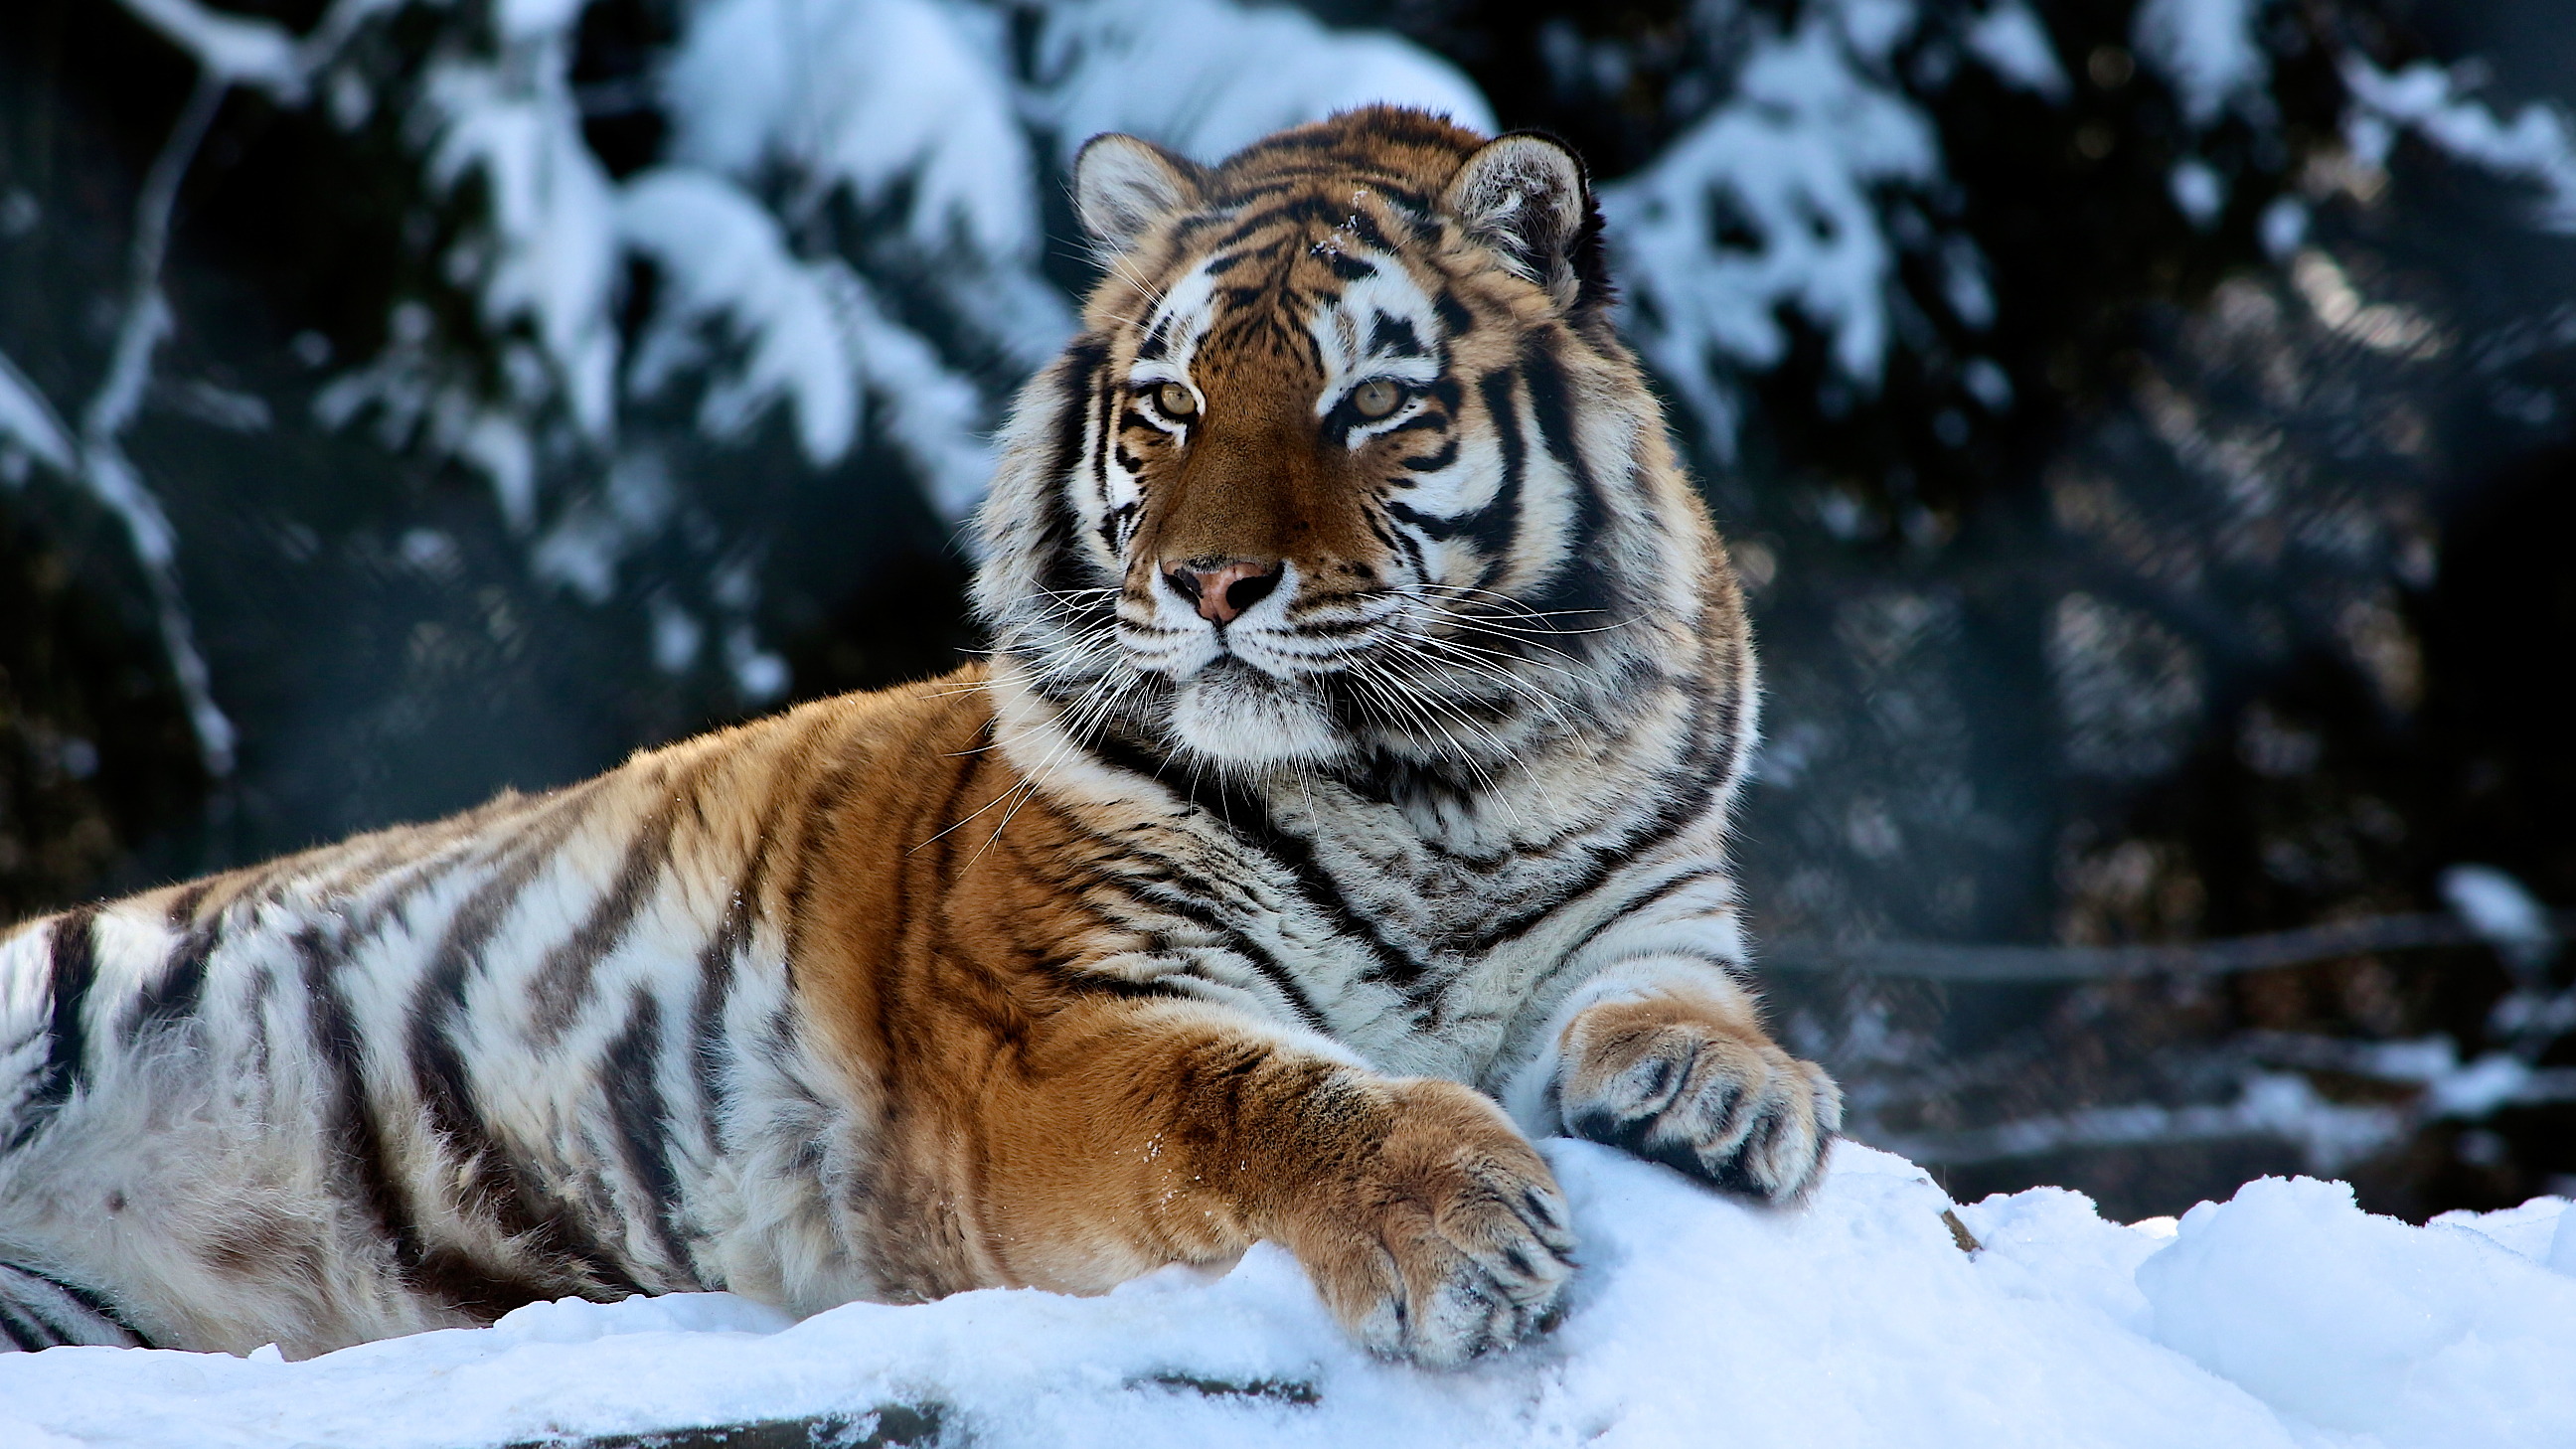 General 2592x1458 animals tiger feline big cats mammals cat eyes outdoors whiskers winter snow stripes nature